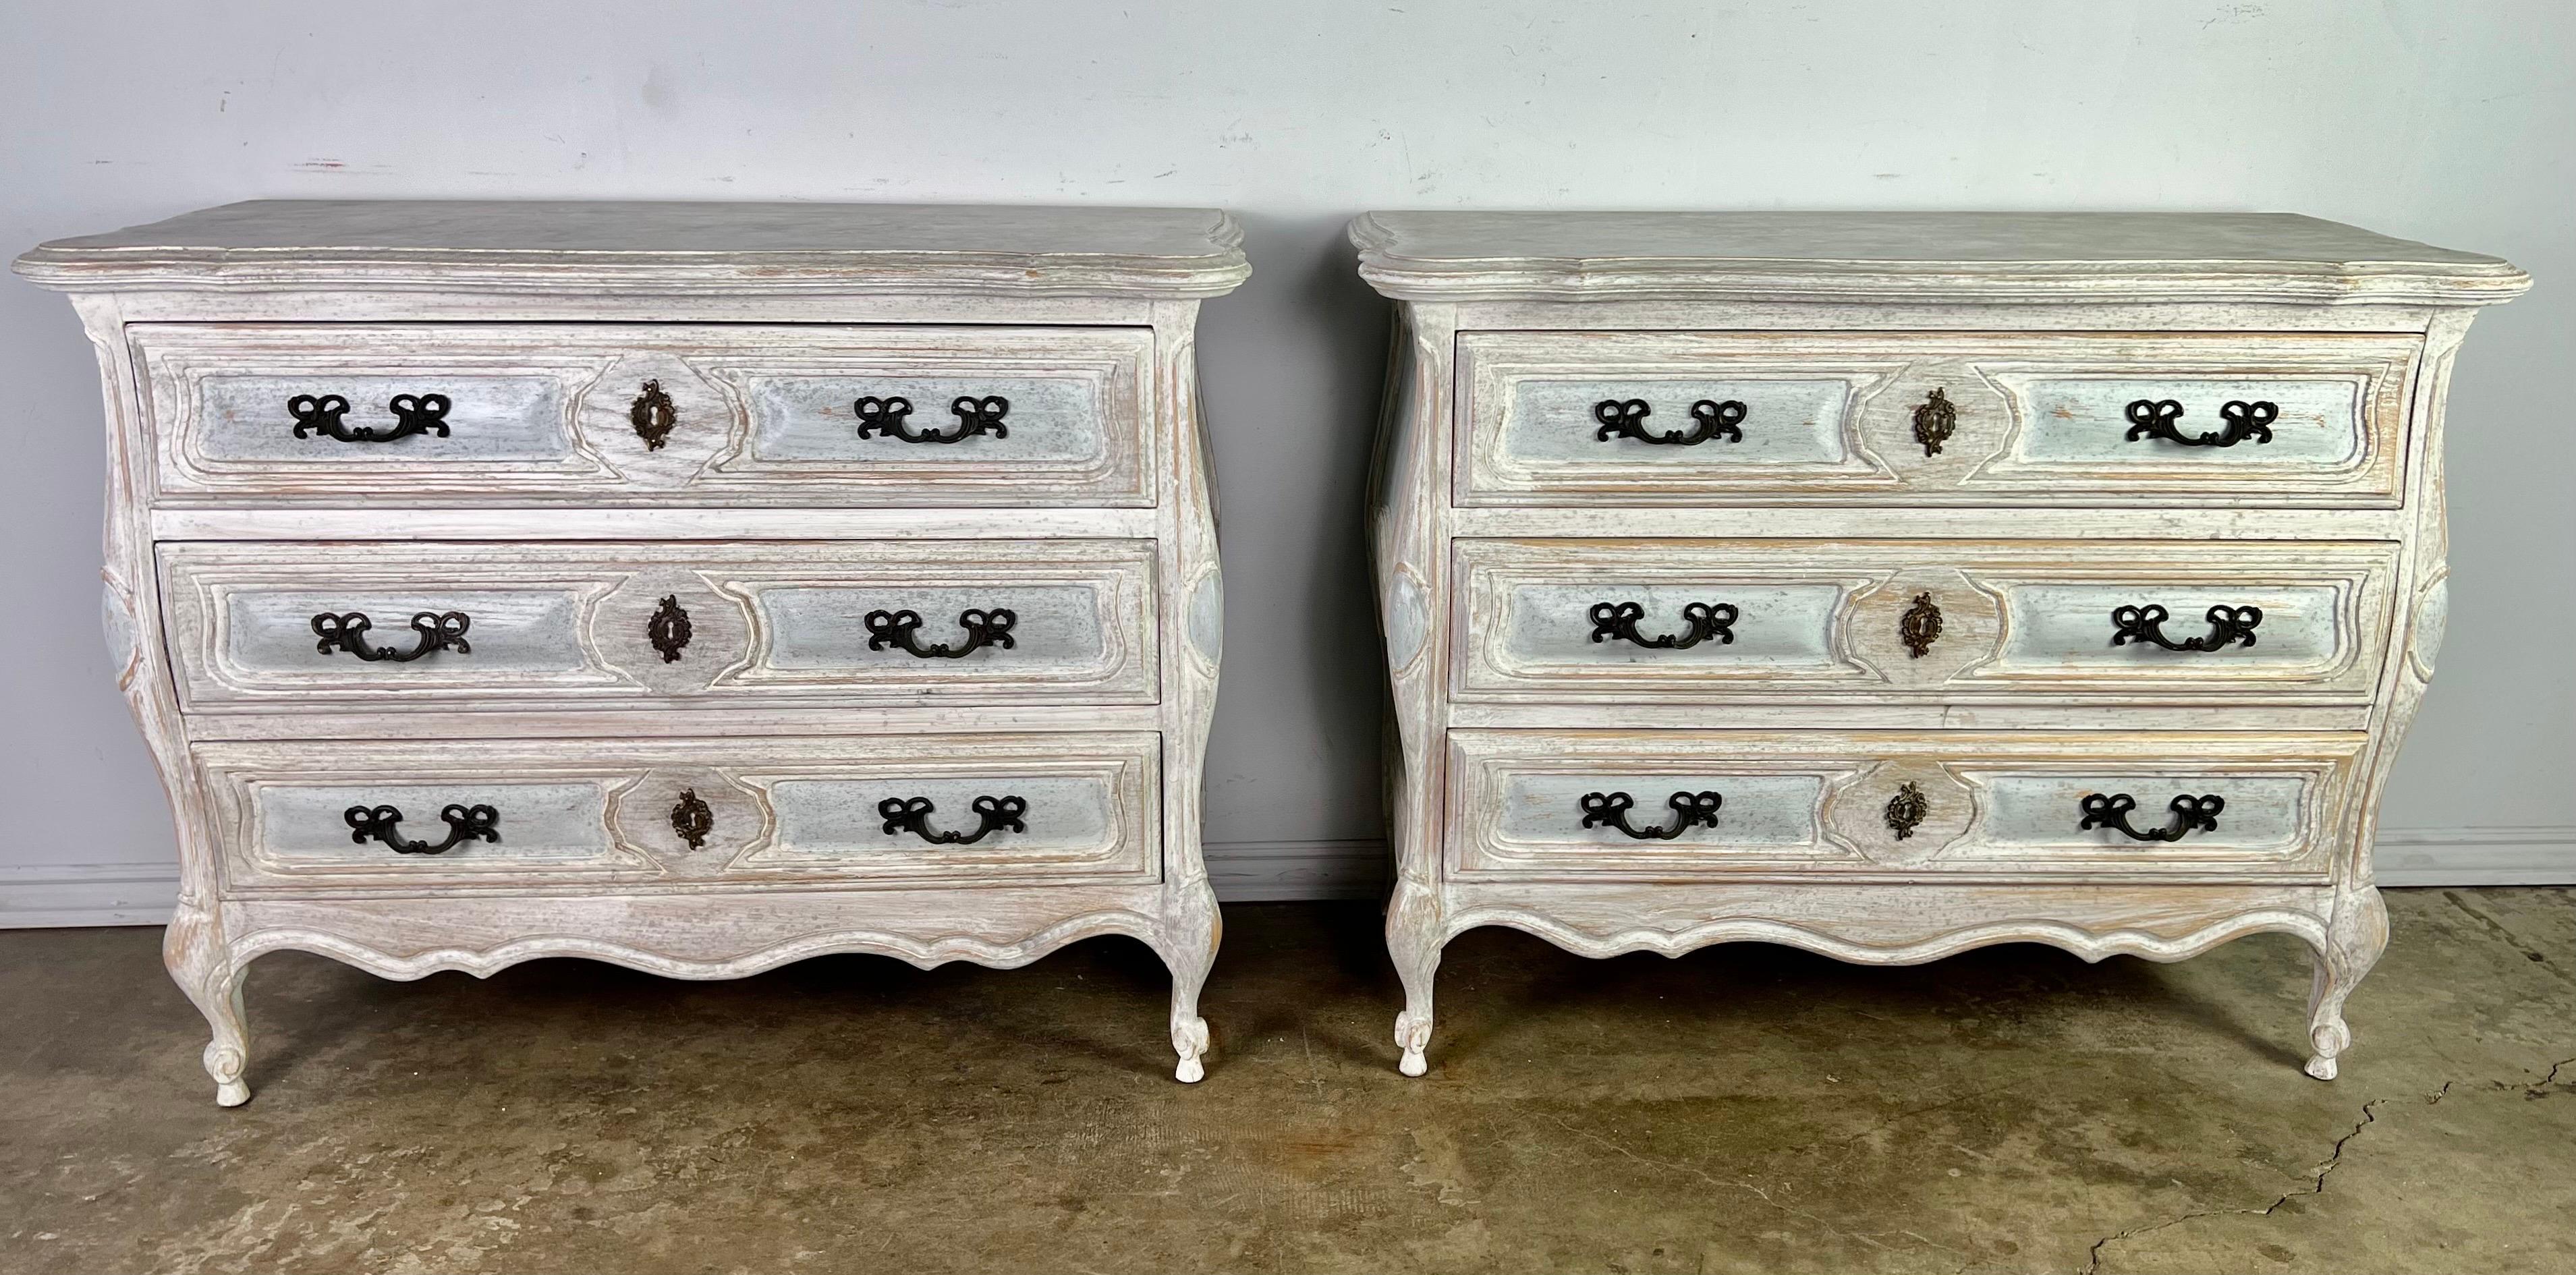 Pair of 1930's French Louis XV style commodes. The commodes are hand painted in soft hues of gray, blue and cream. They are a great addition to any bedroom. The chests stand on four cabriole legs that ends in rams head feet. Graceful scalloped apron